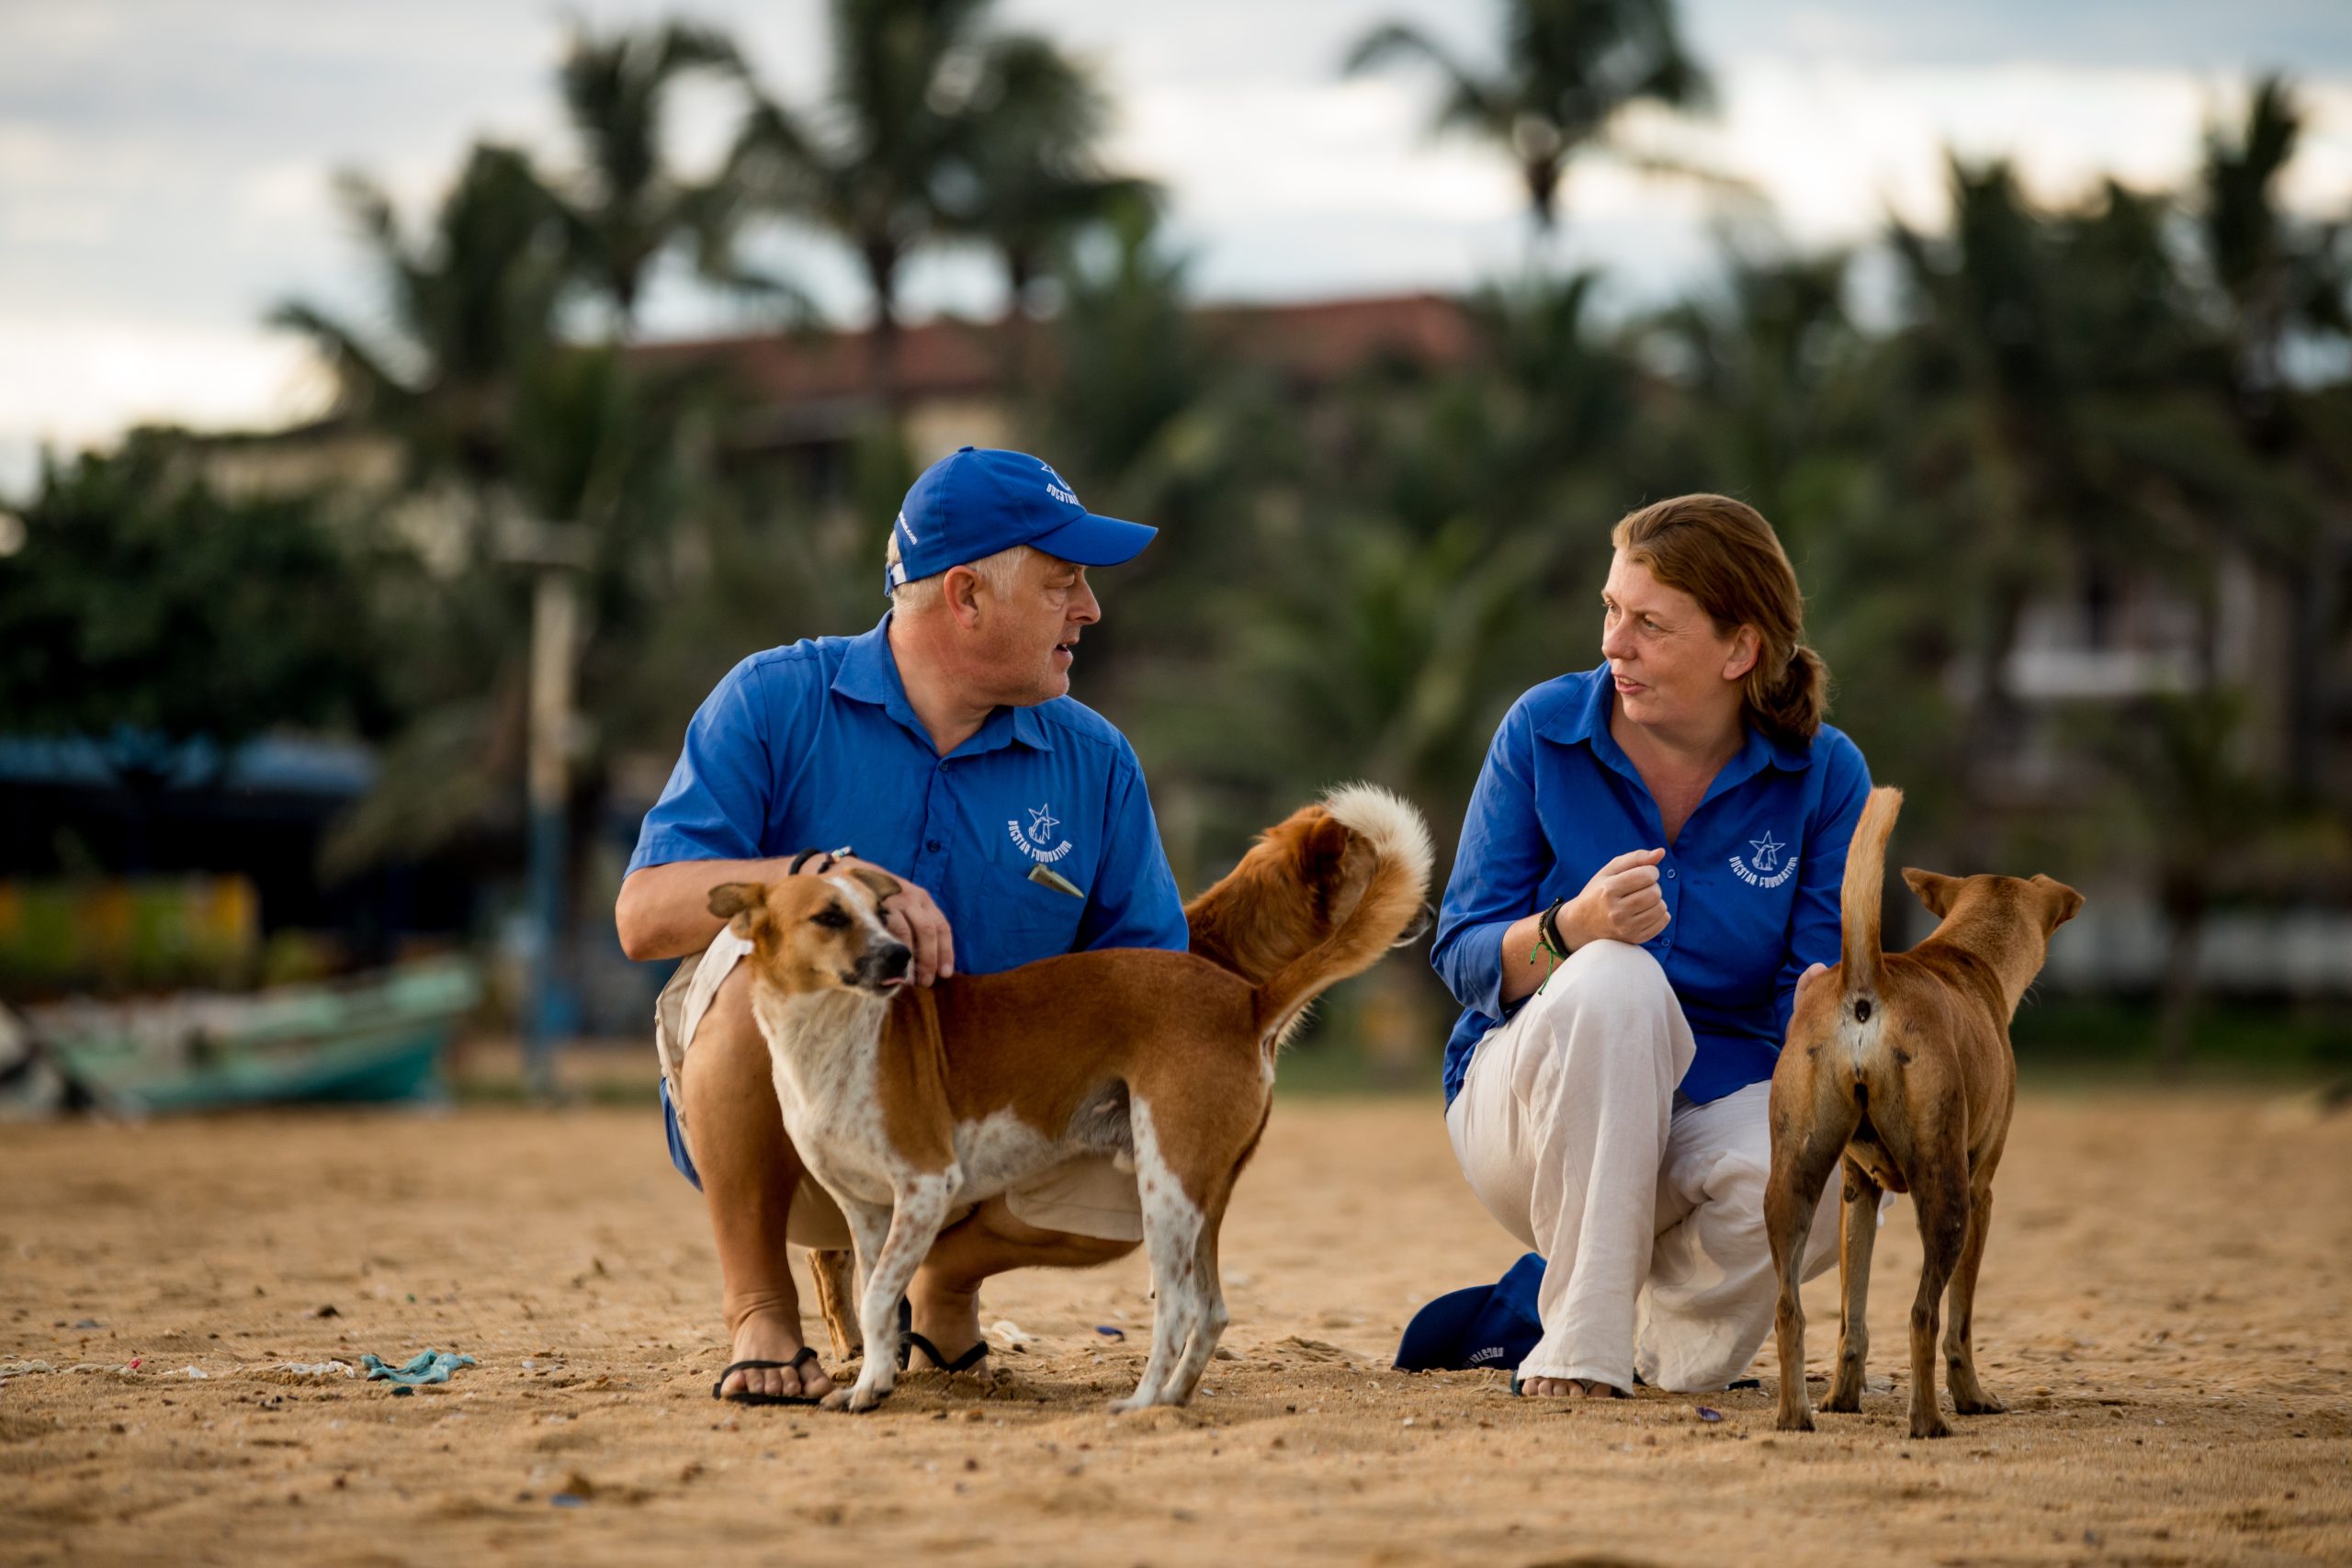 Dogstar's CEO and Deputy Director Sam and Mark kneeling down on the beach to tend to two street dogs.